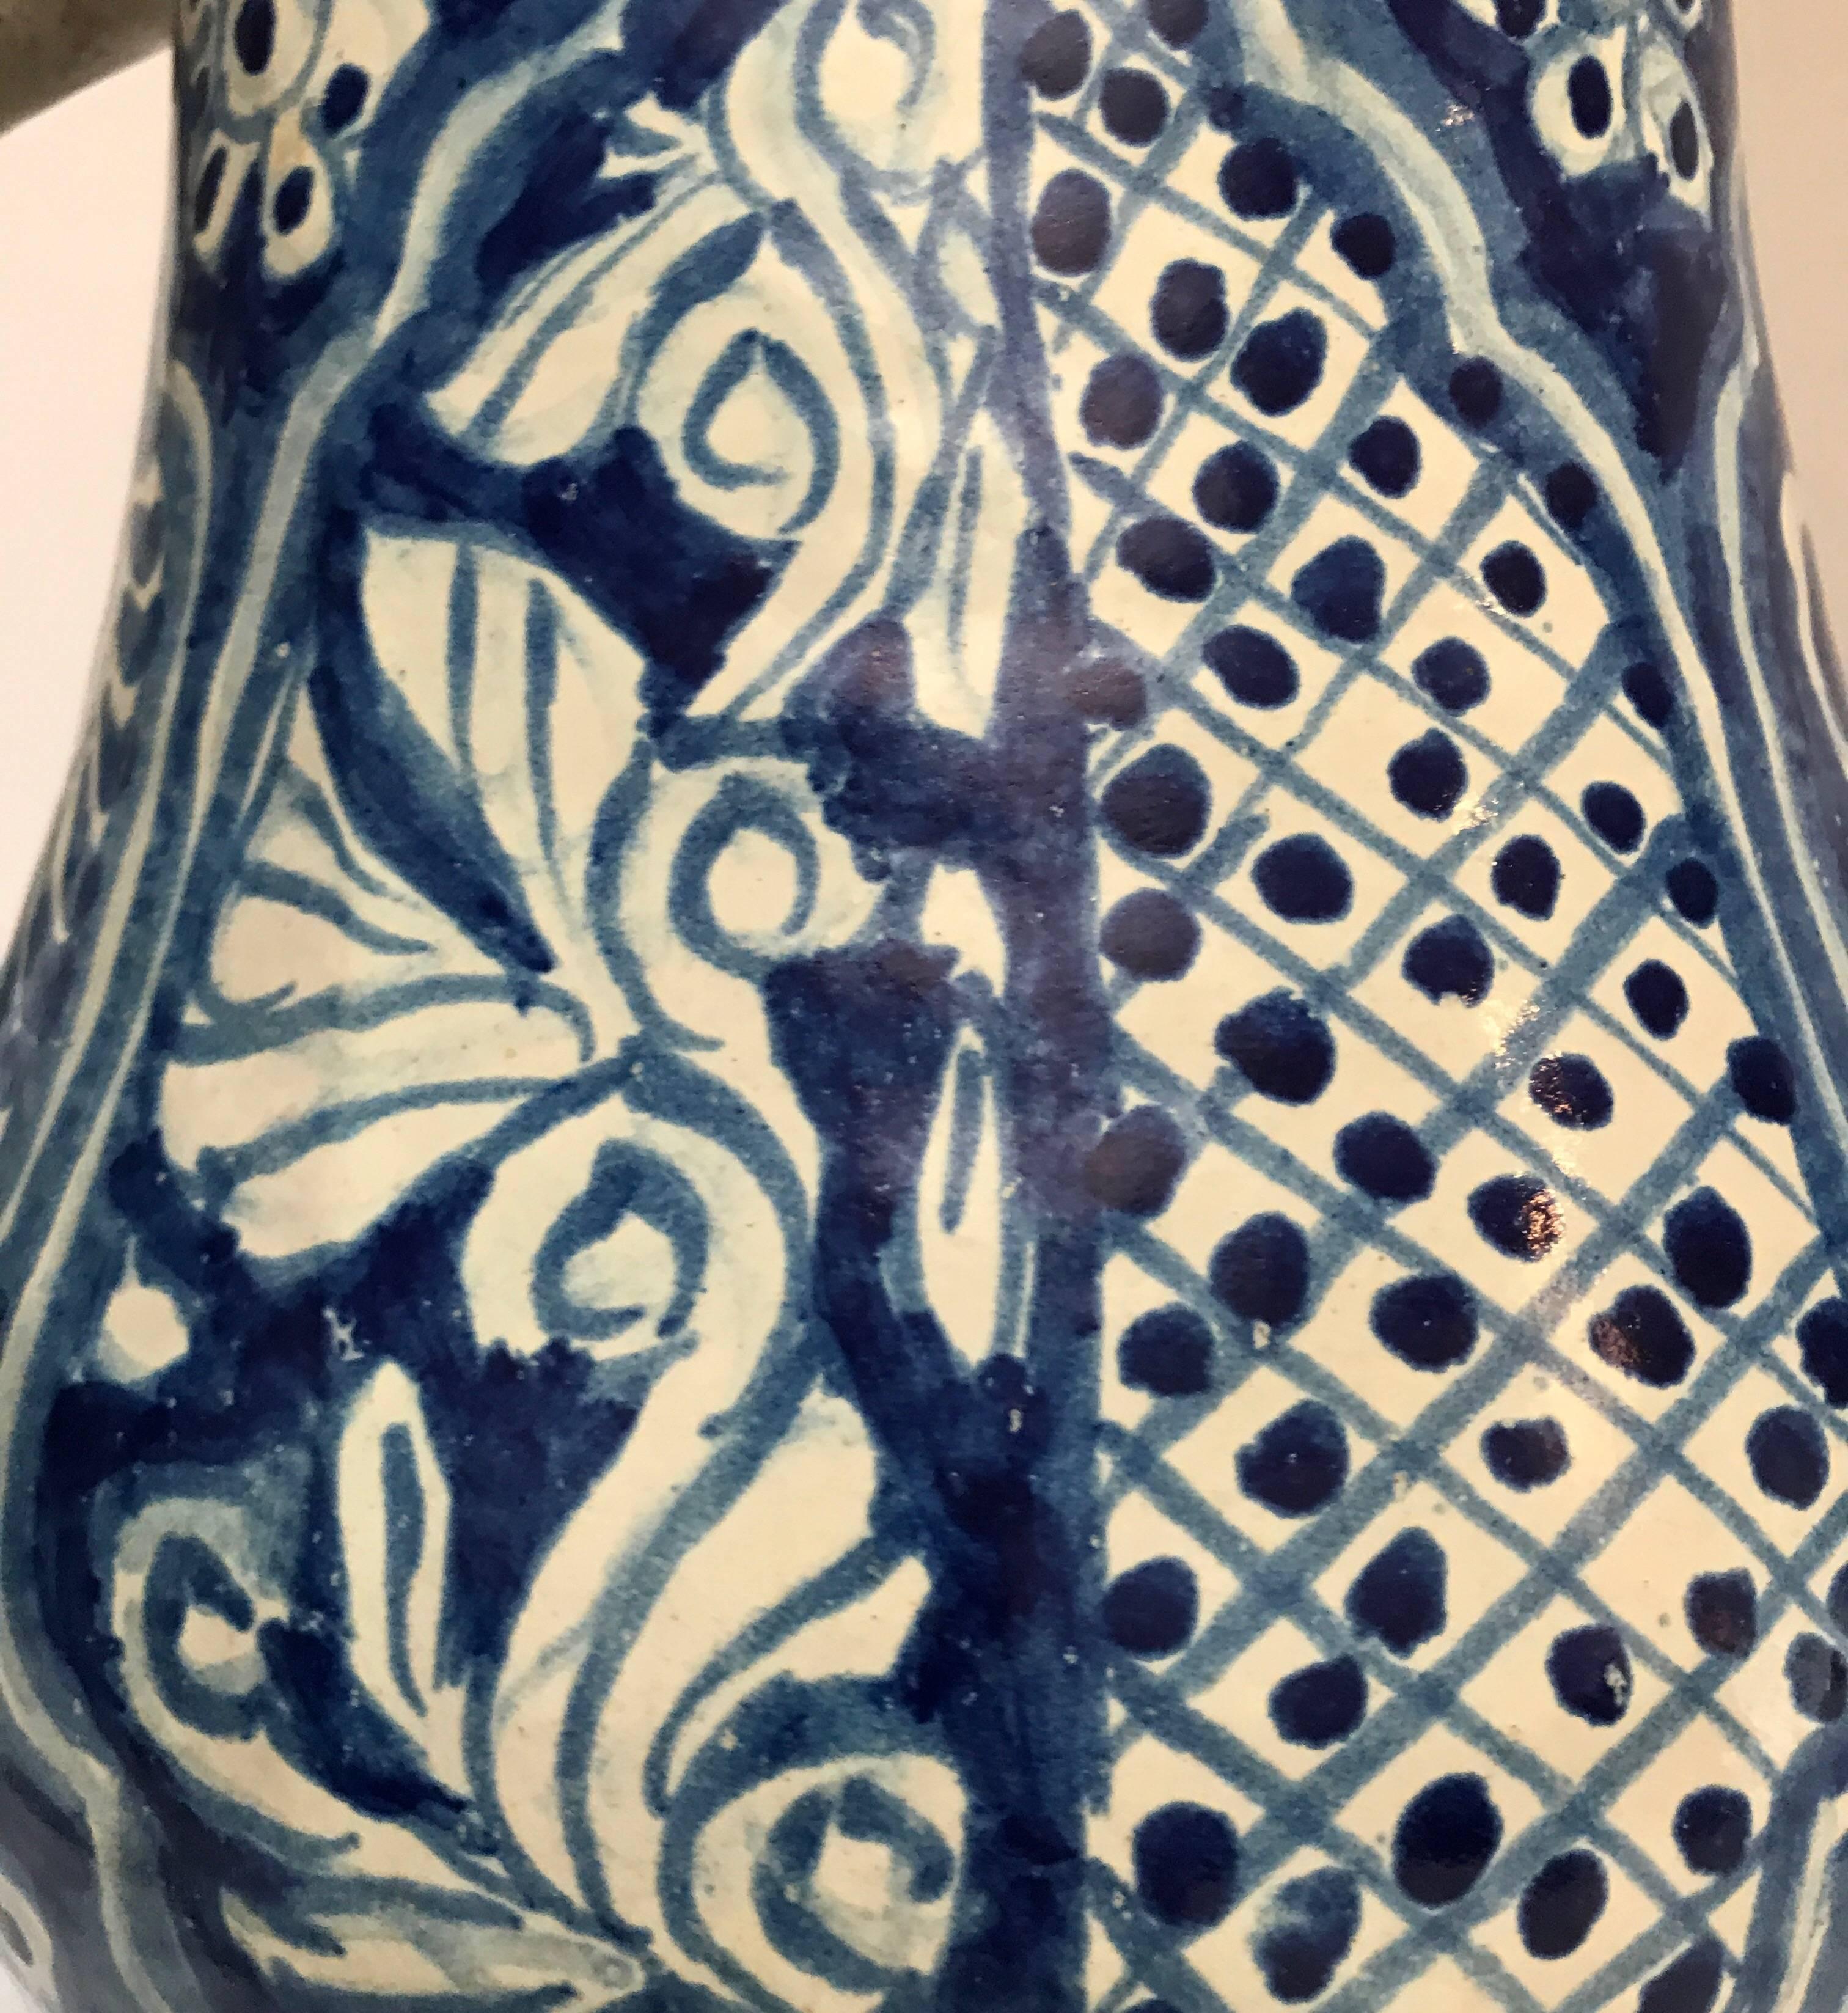 Painted Large Ceramic Mexican Blue and White Talavera Pitcher